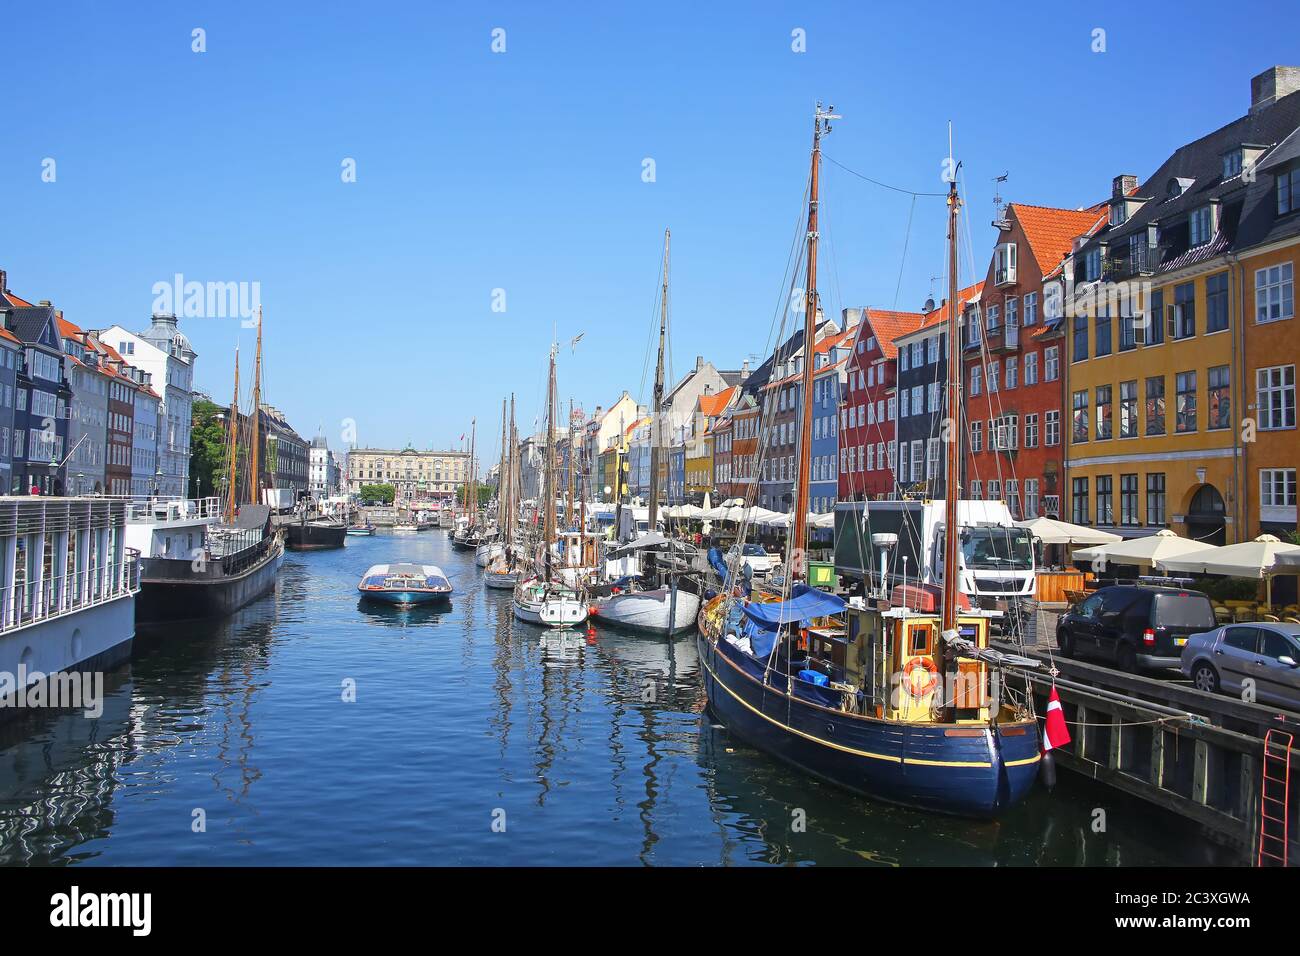 Nyhavn which is a Historic 17th-century waterfront with wooden ships, canal, colourful buildings and entertainment district in Copenhagen, Denmark. Stock Photo